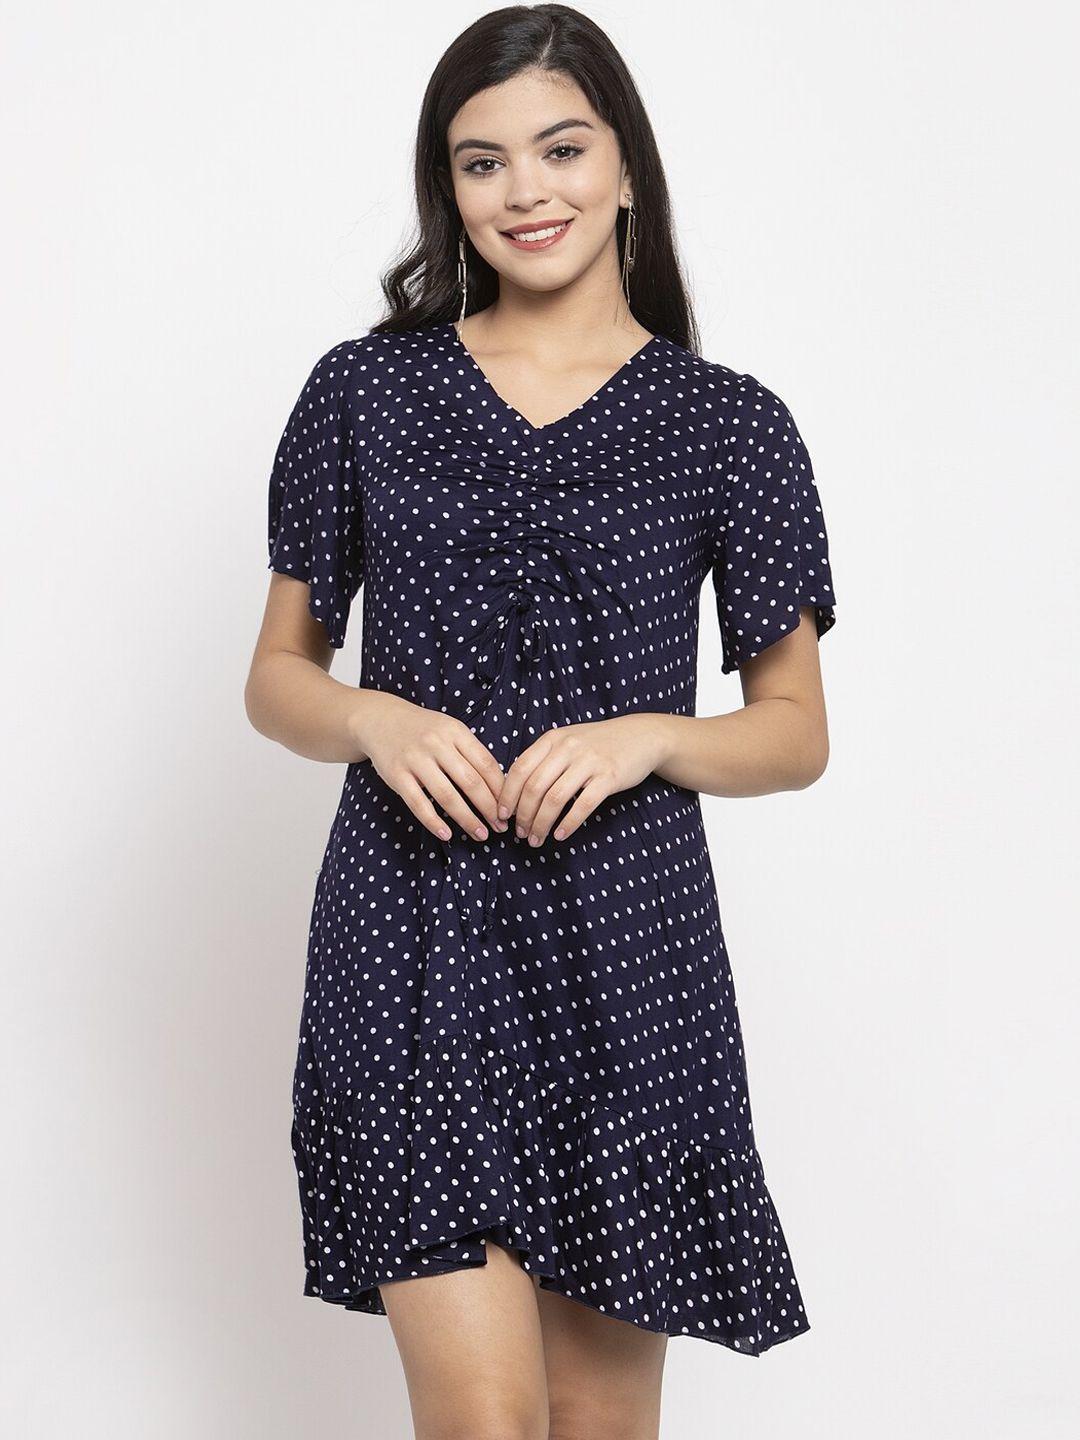 kassually-women-blue-&-white-printed-a-line-ruched-mini-dress